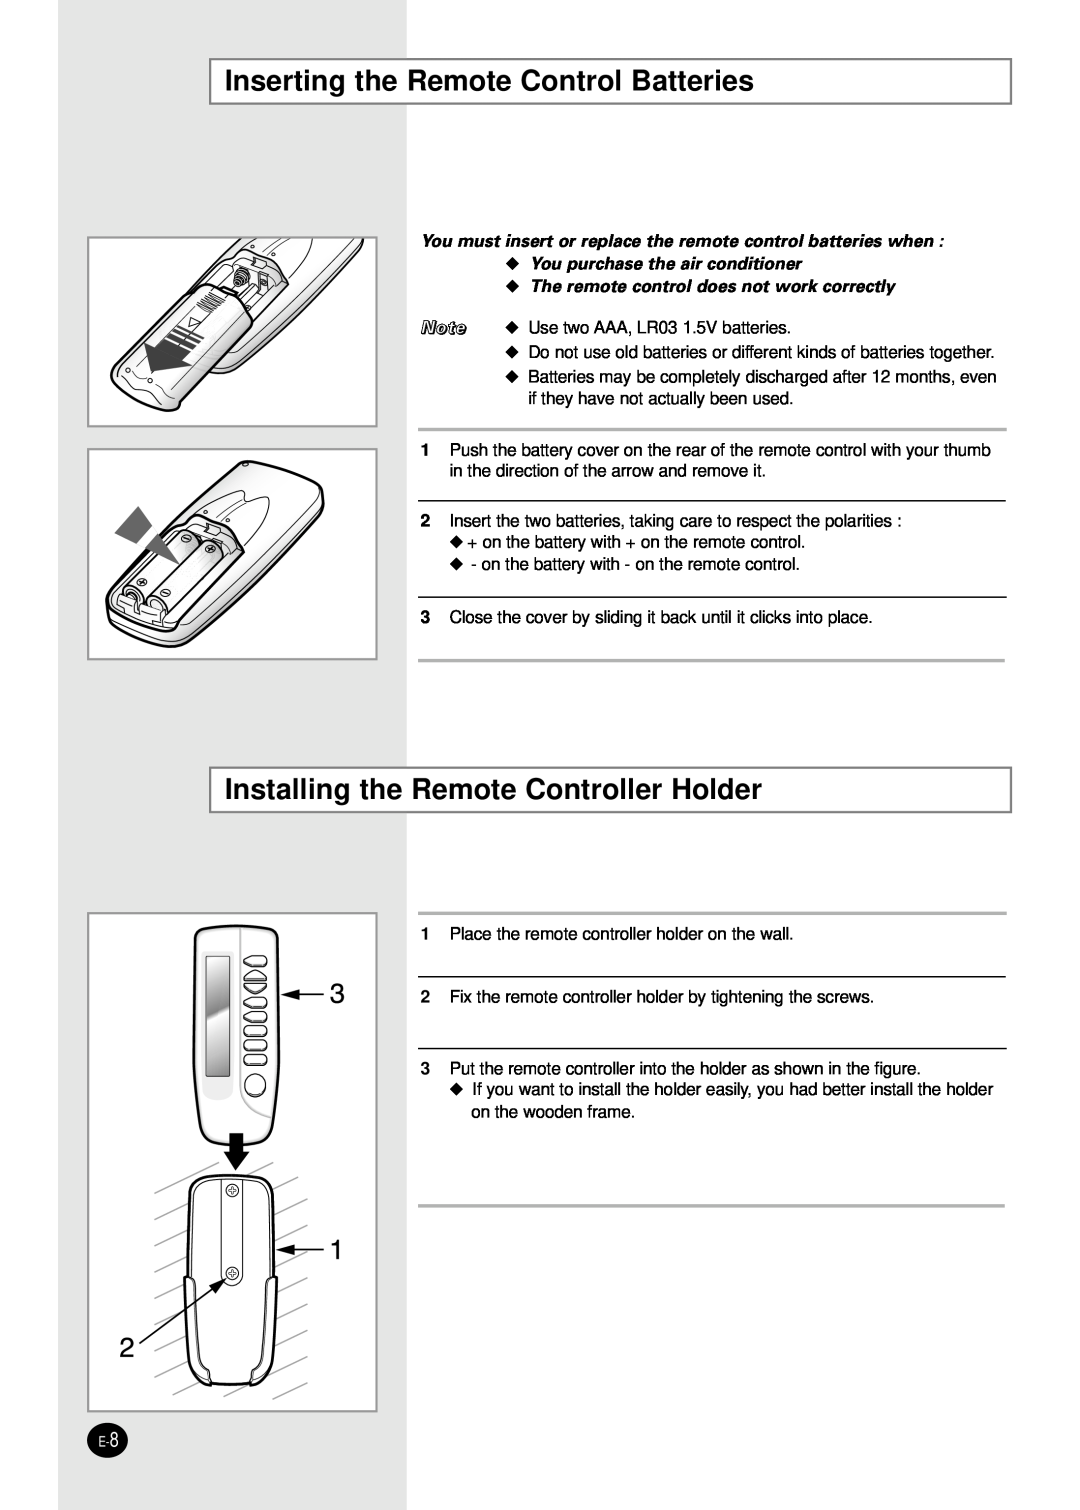 Samsung AM18B1C09 installation manual Inserting the Remote Control Batteries, Installing the Remote Controller Holder 